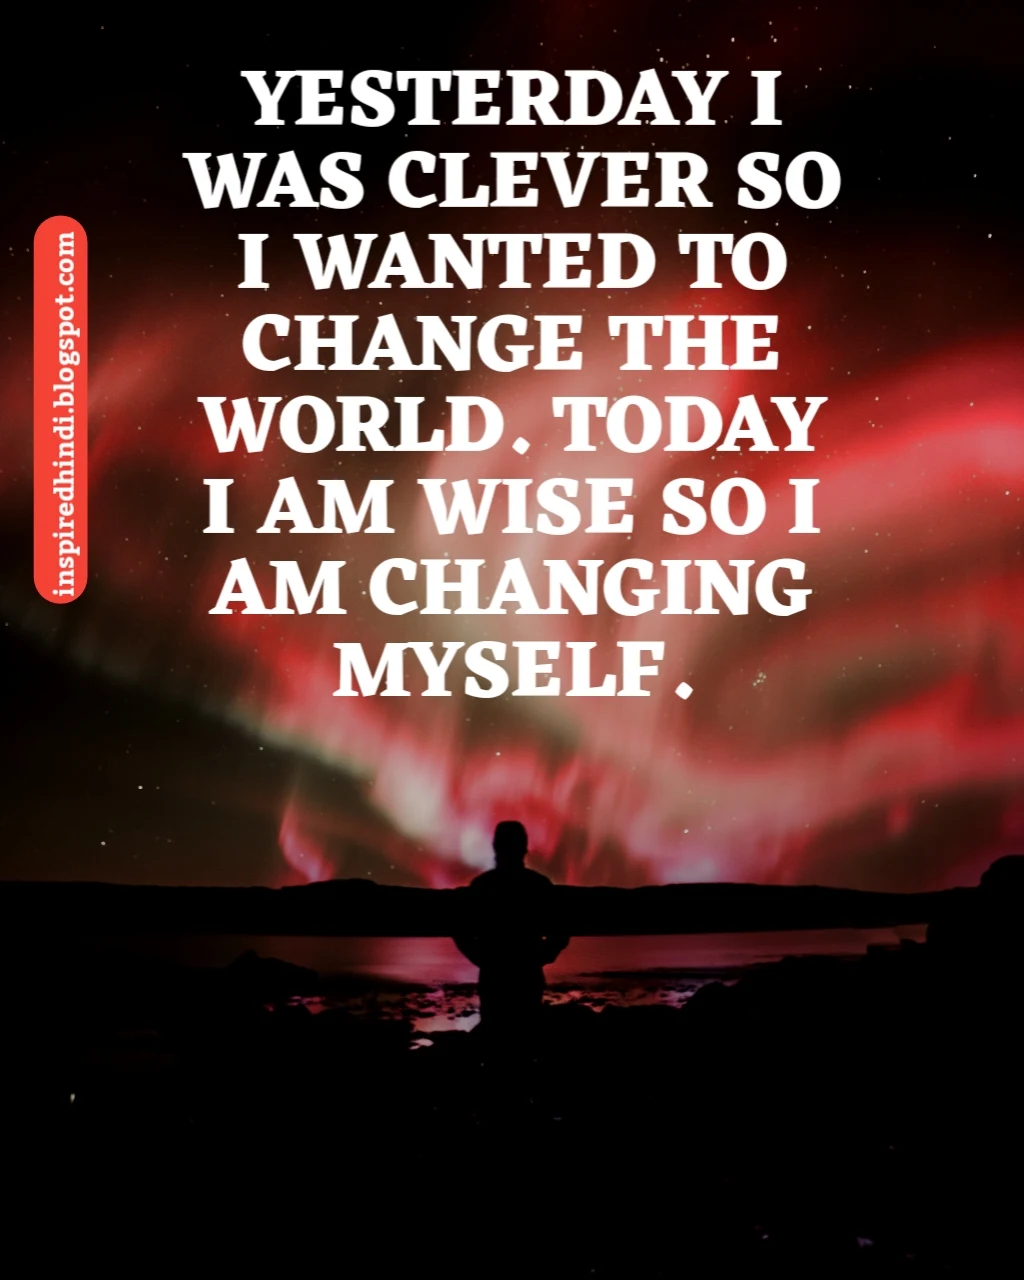 YESTERDAY I WAS CLEVER SO I WANTED TO CHANGE THE WORLD, TODAY I AM WISE SO I AM CHANGING MY SELF.